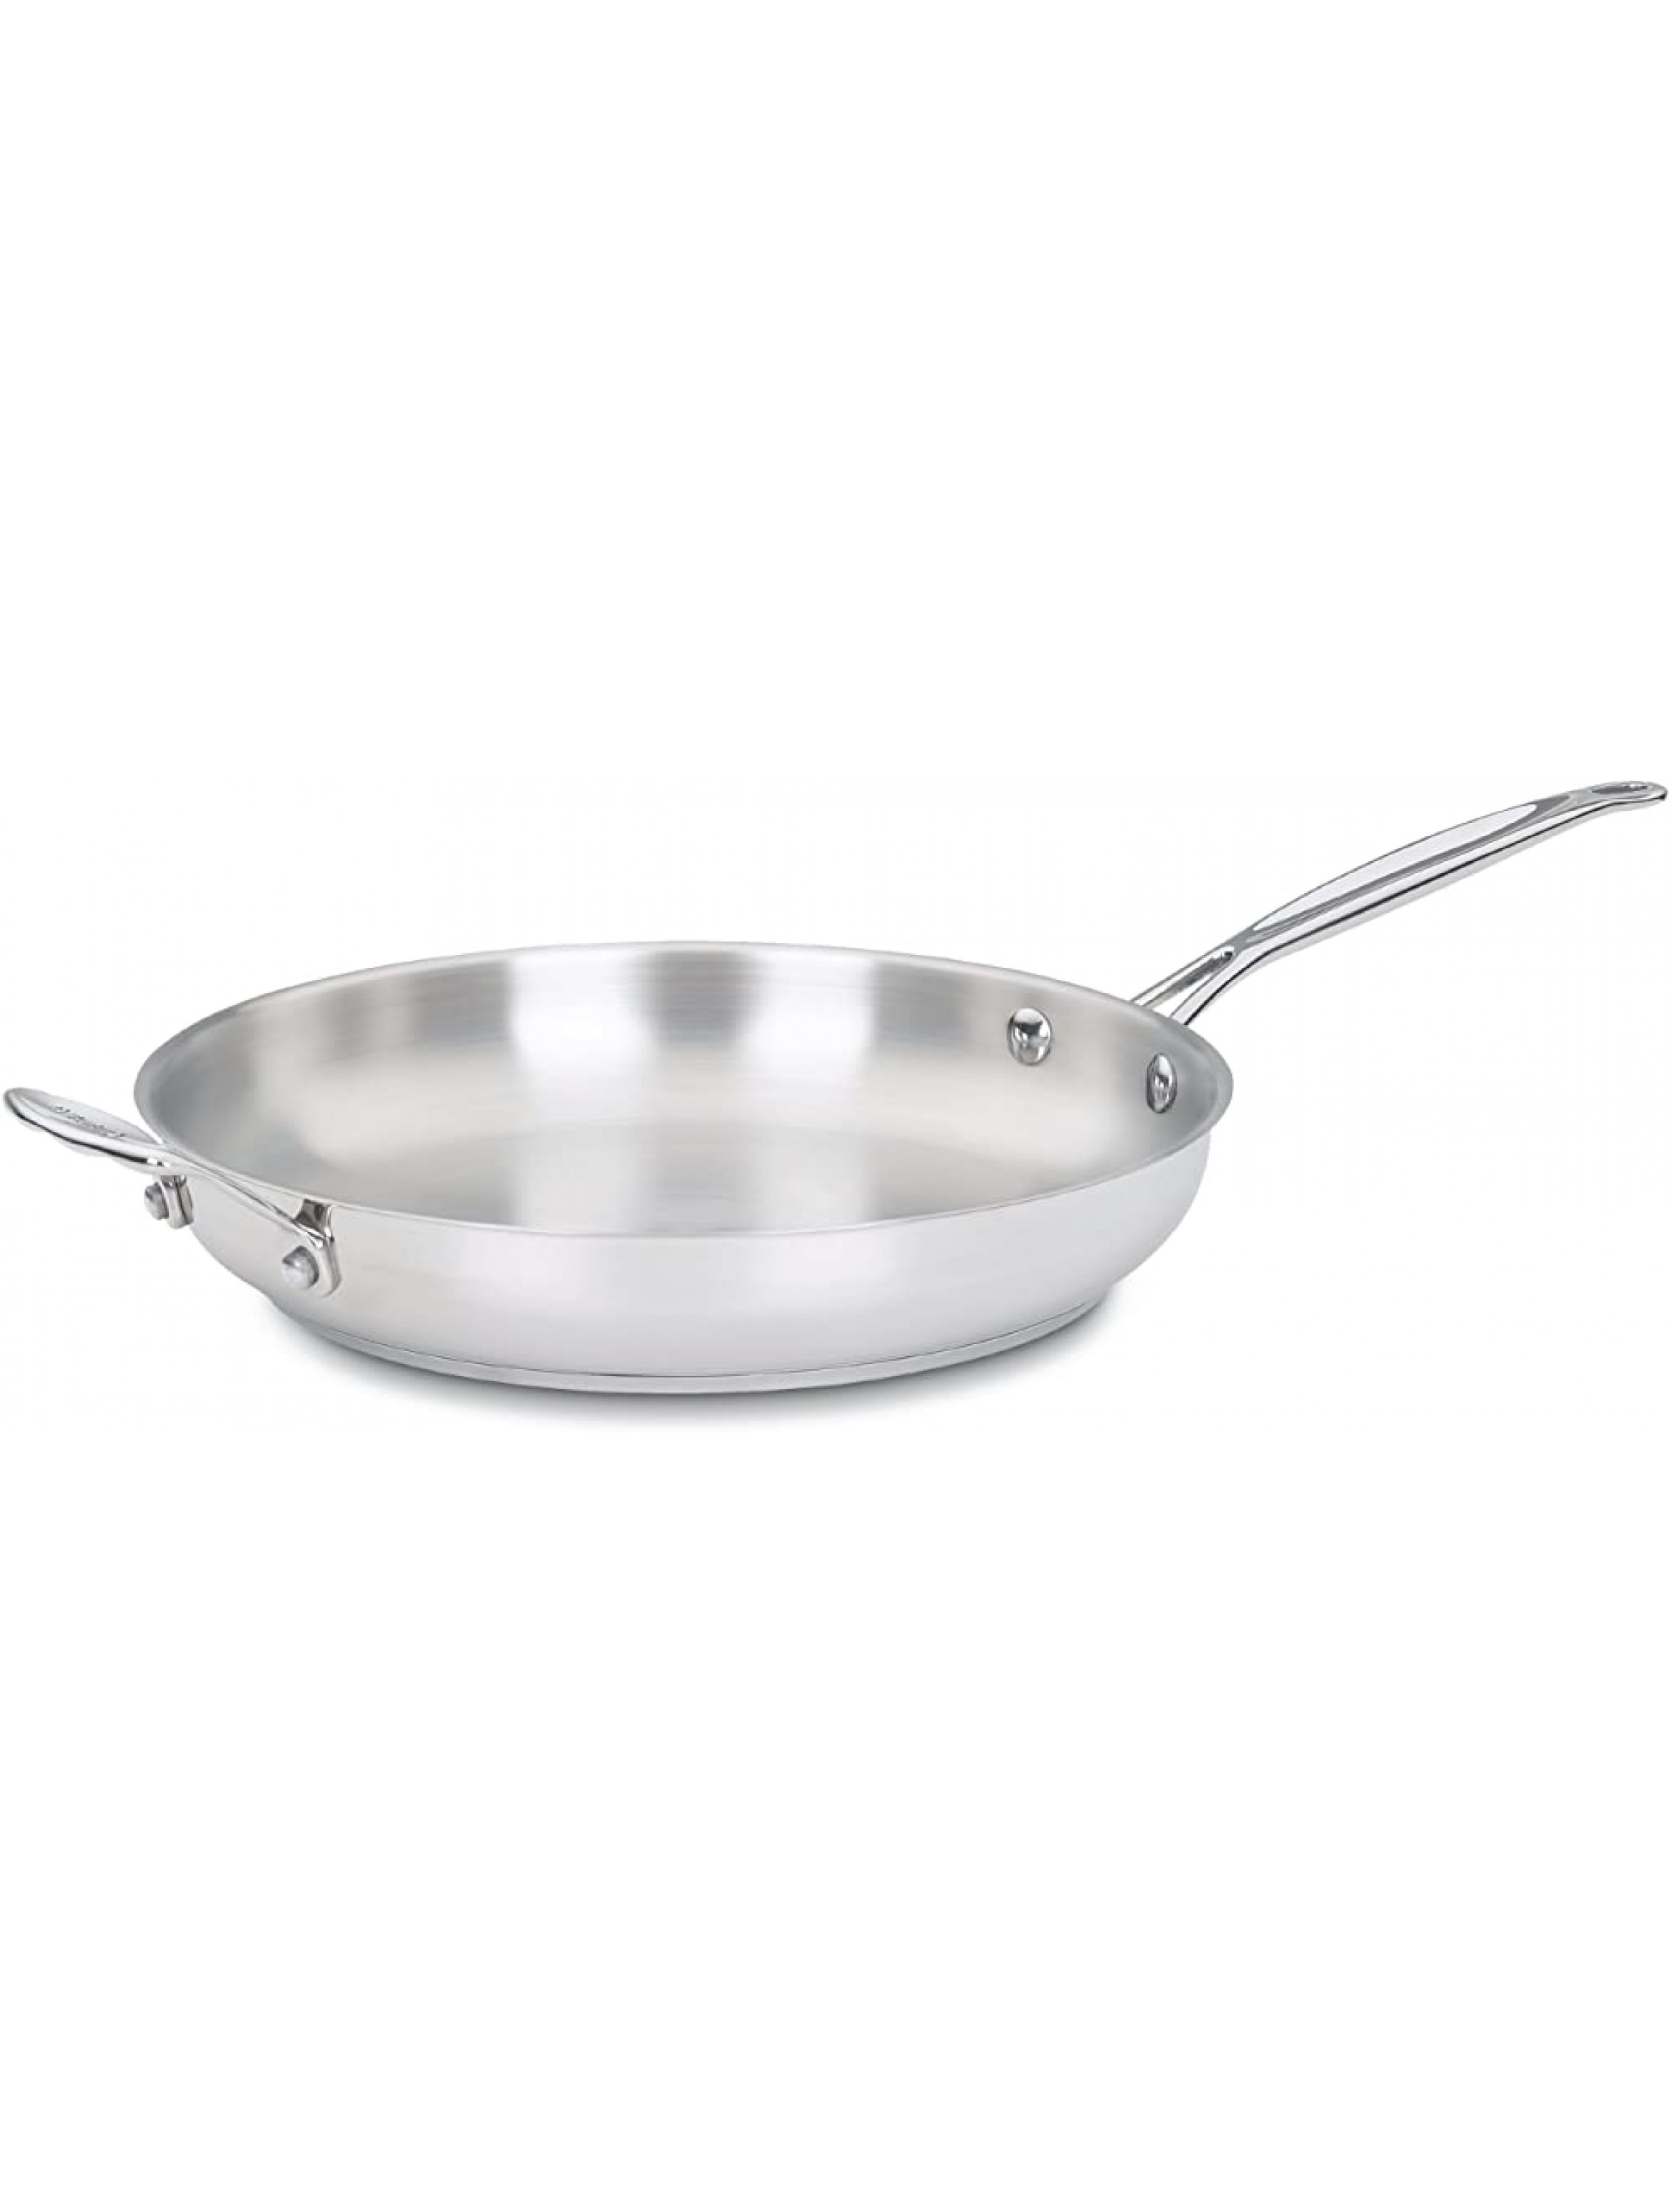 Cuisinart 722-30H Chef's Classic Stainless 12-Inch Open Skillet with Helper Handle,Stainless Steel - BVJ78J9N4